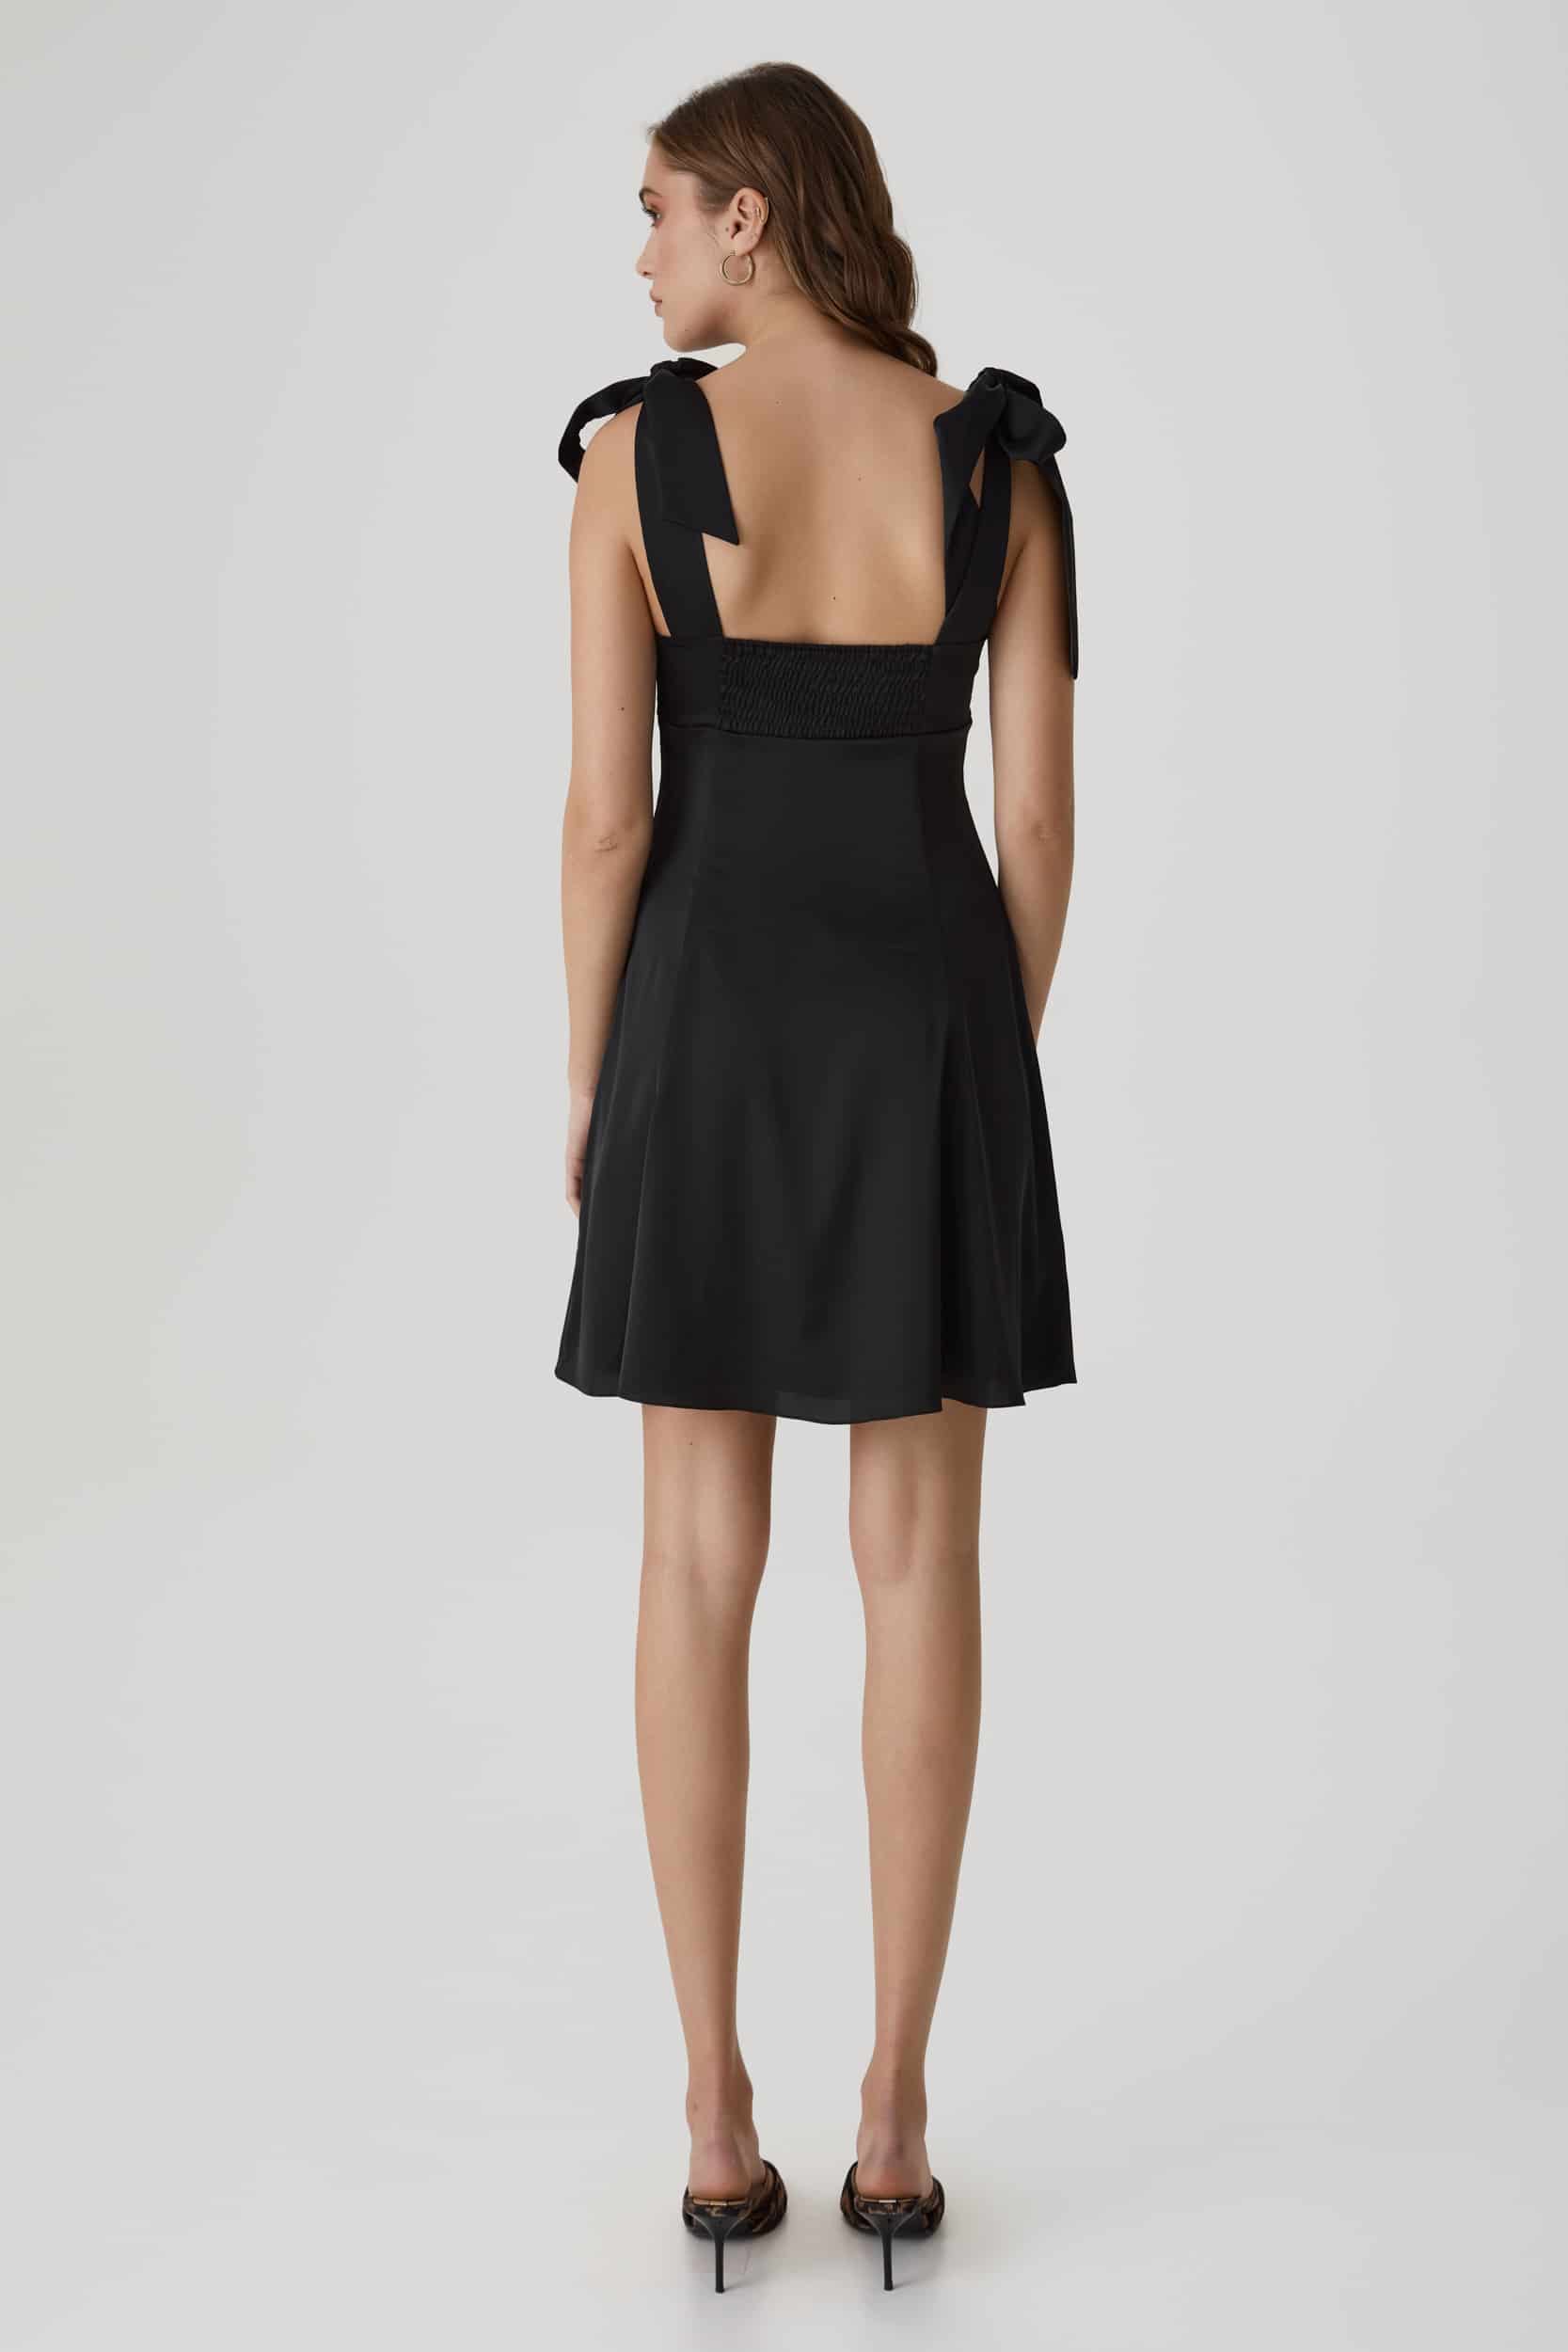 Shop Ribbon-strap flared mini dress in black from Lita Couture at 